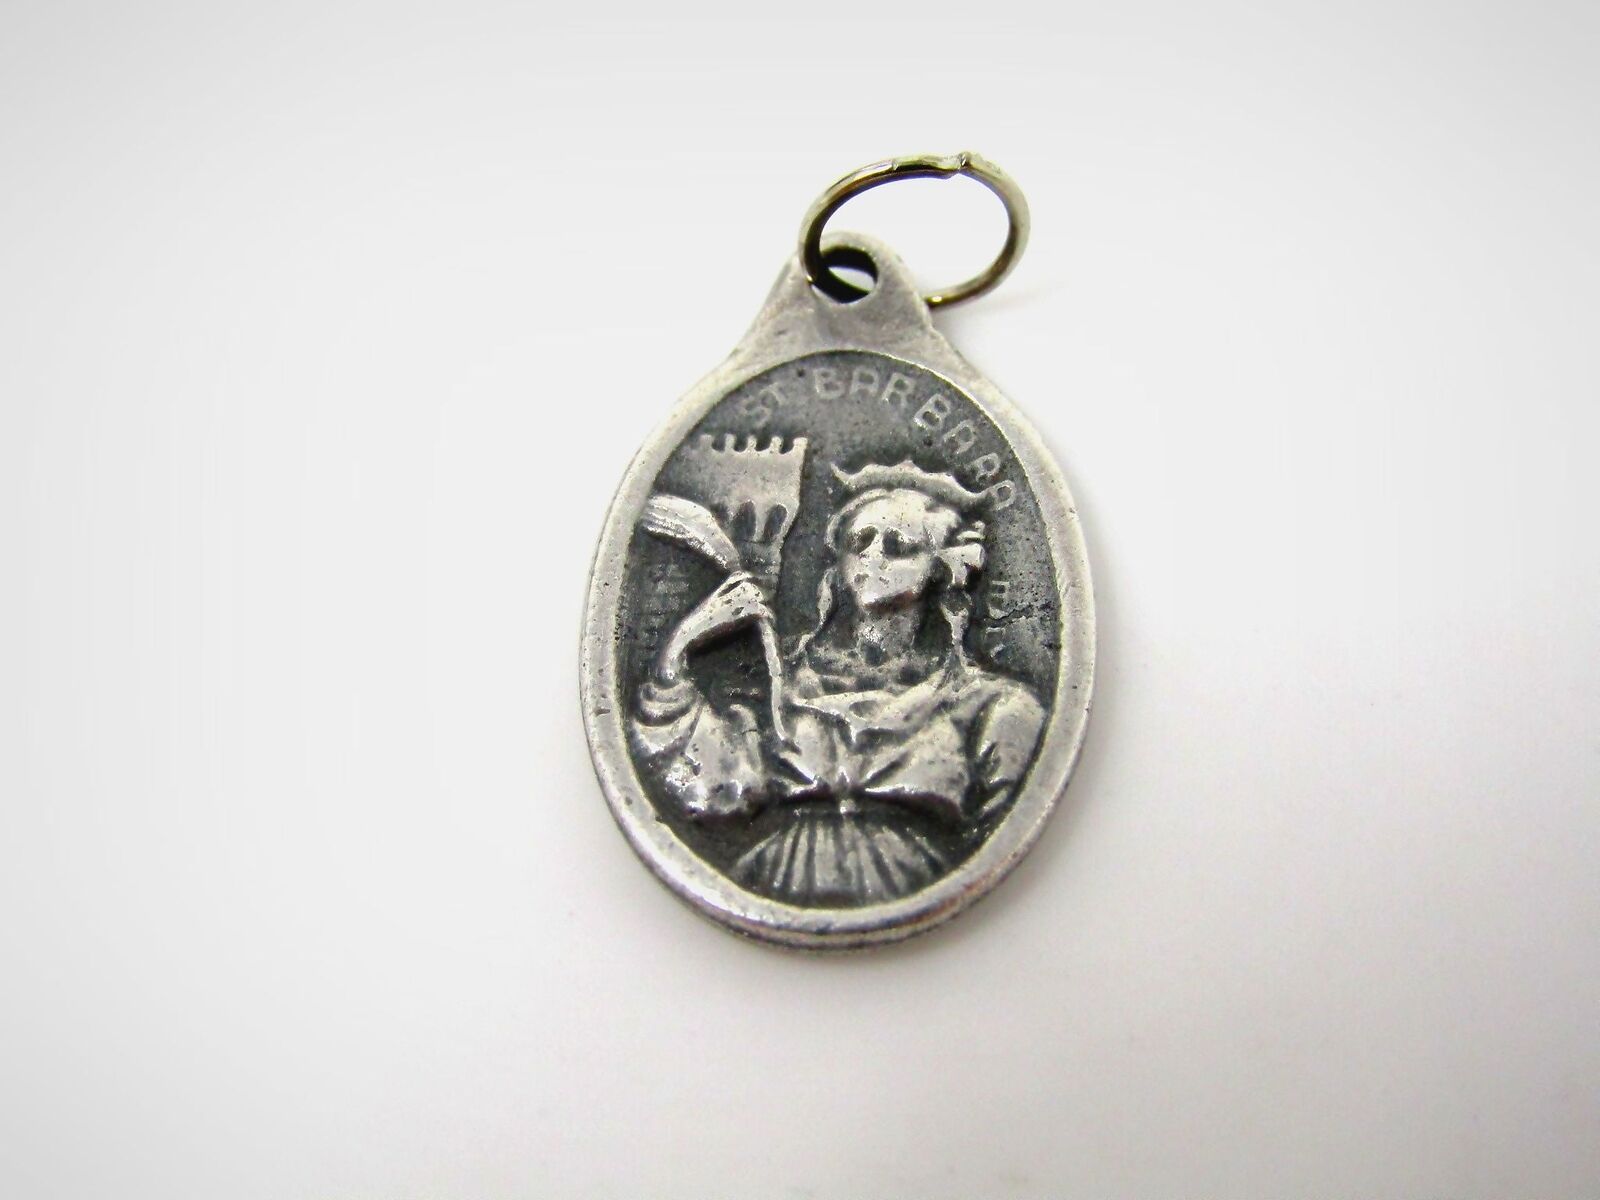 Vintage Christian Medal Charm: Saint Barbara Pray for Us Made in Italy